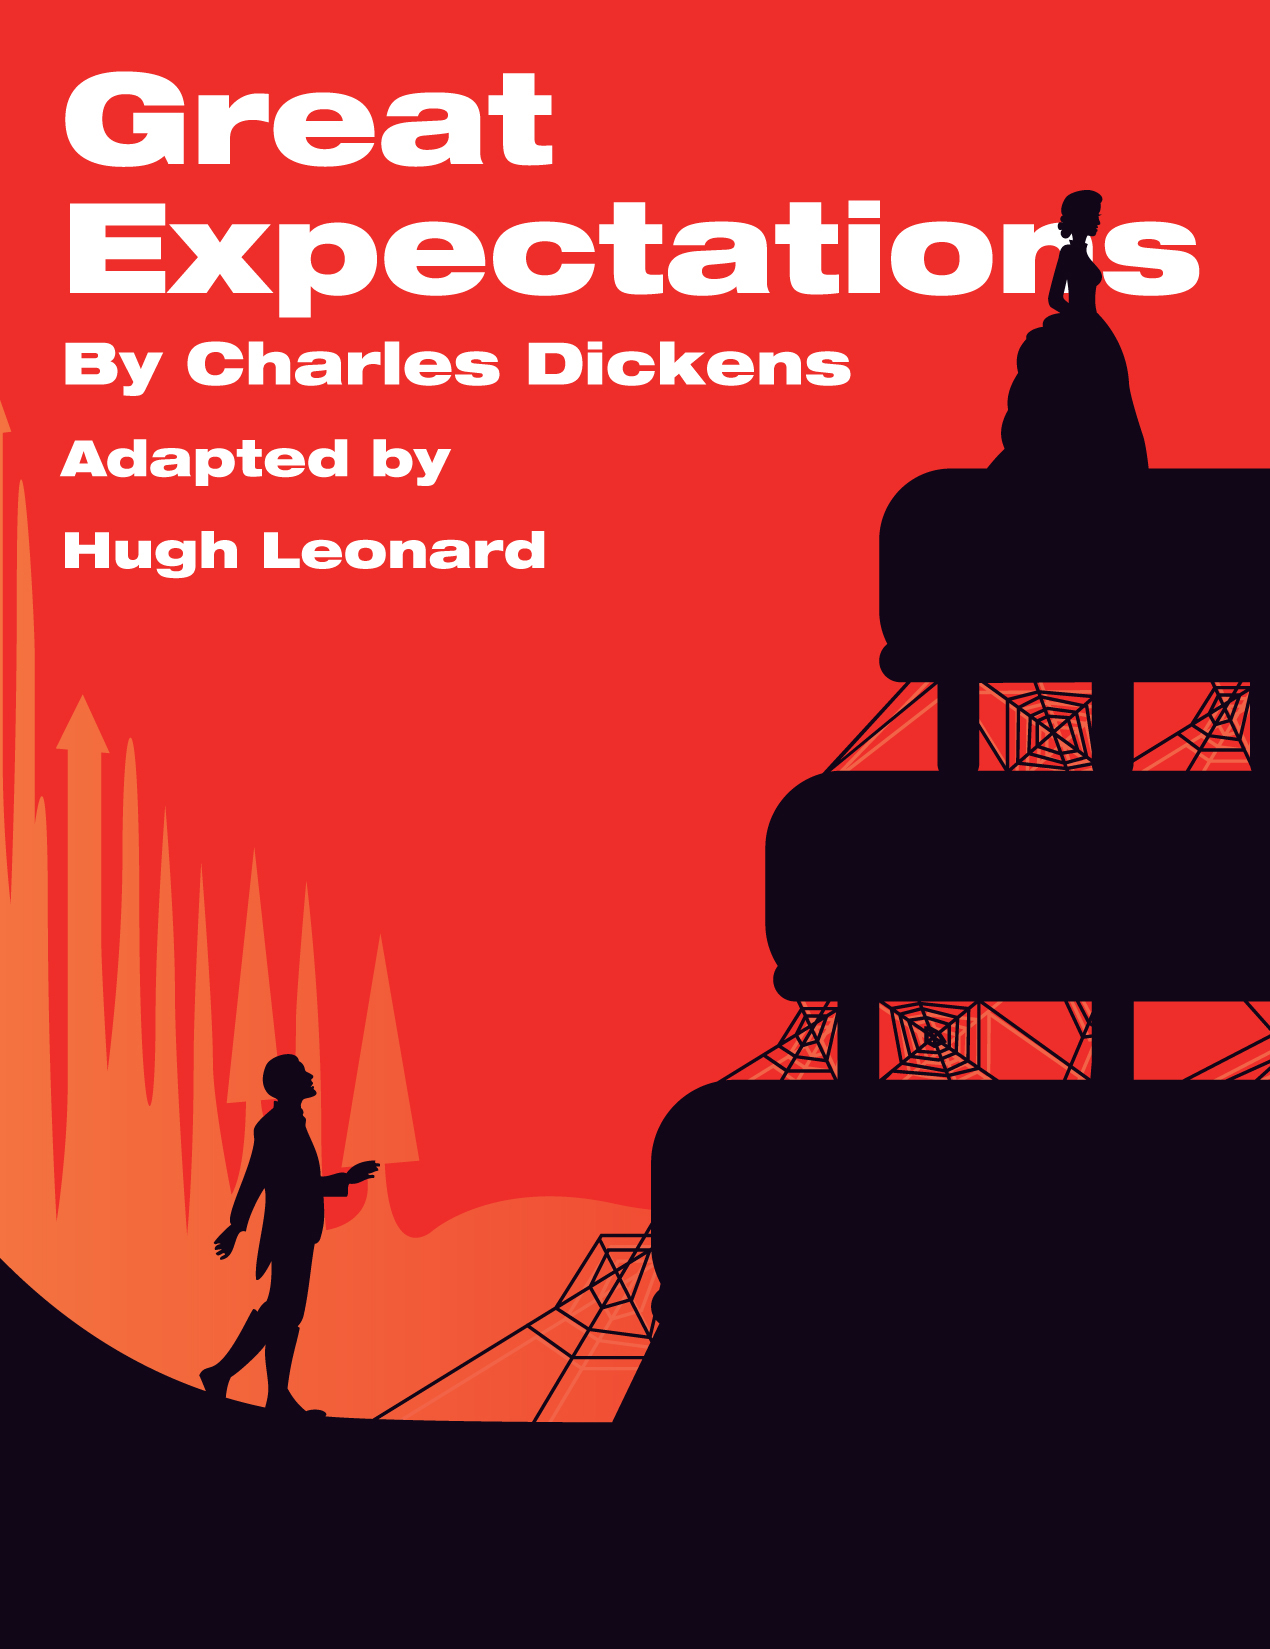 "Great Expectations" at PICT Classic Theatre